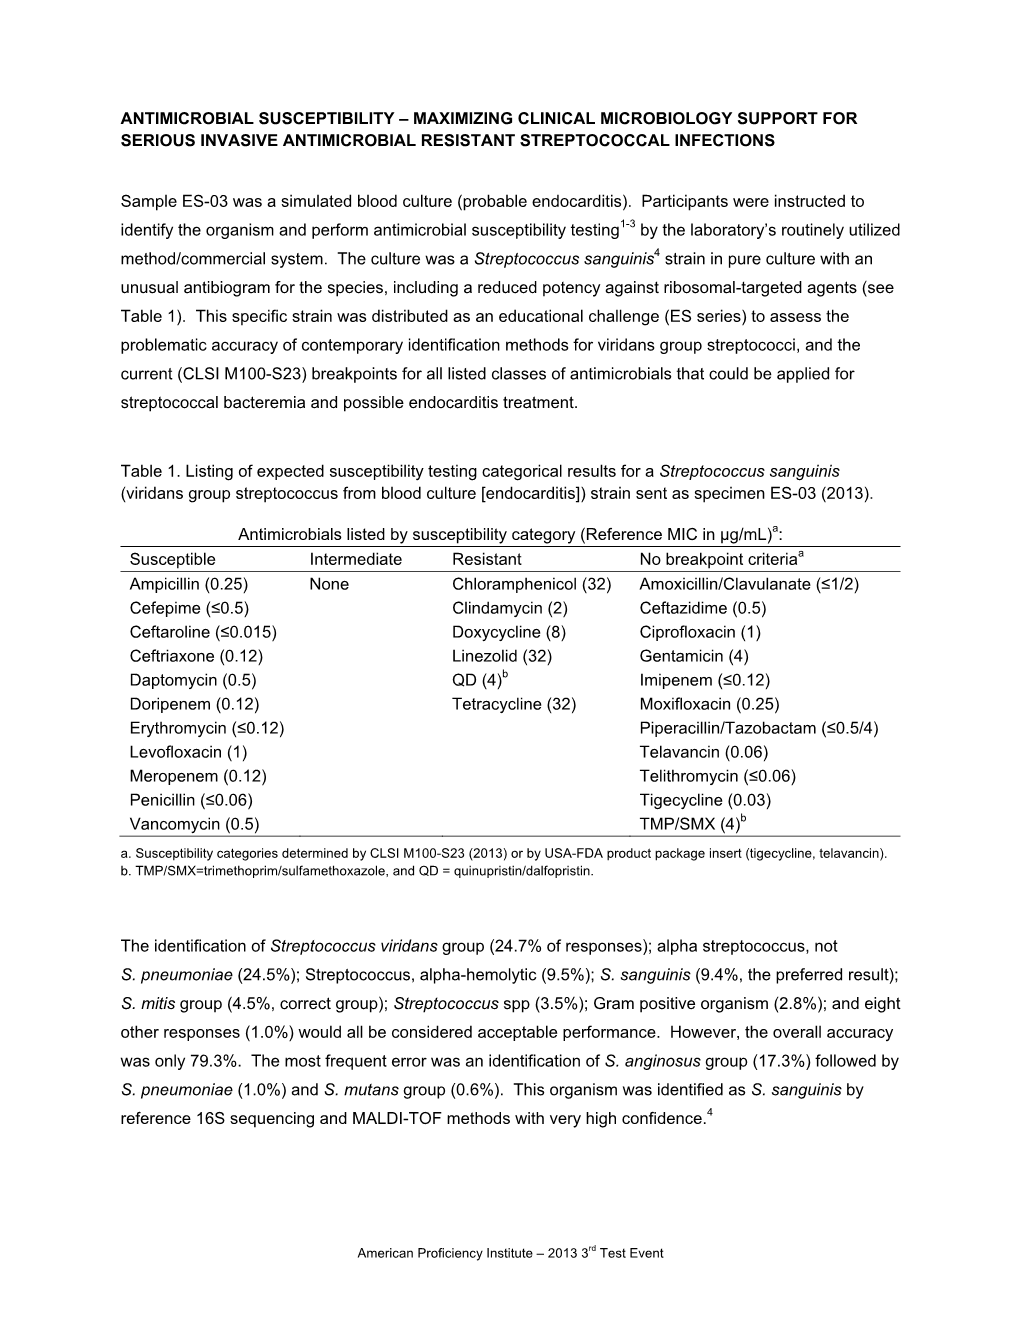 Antimicrobial Susceptibility – Maximizing Clinical Microbiology Support for Serious Invasive Antimicrobial Resistant Streptococcal Infections